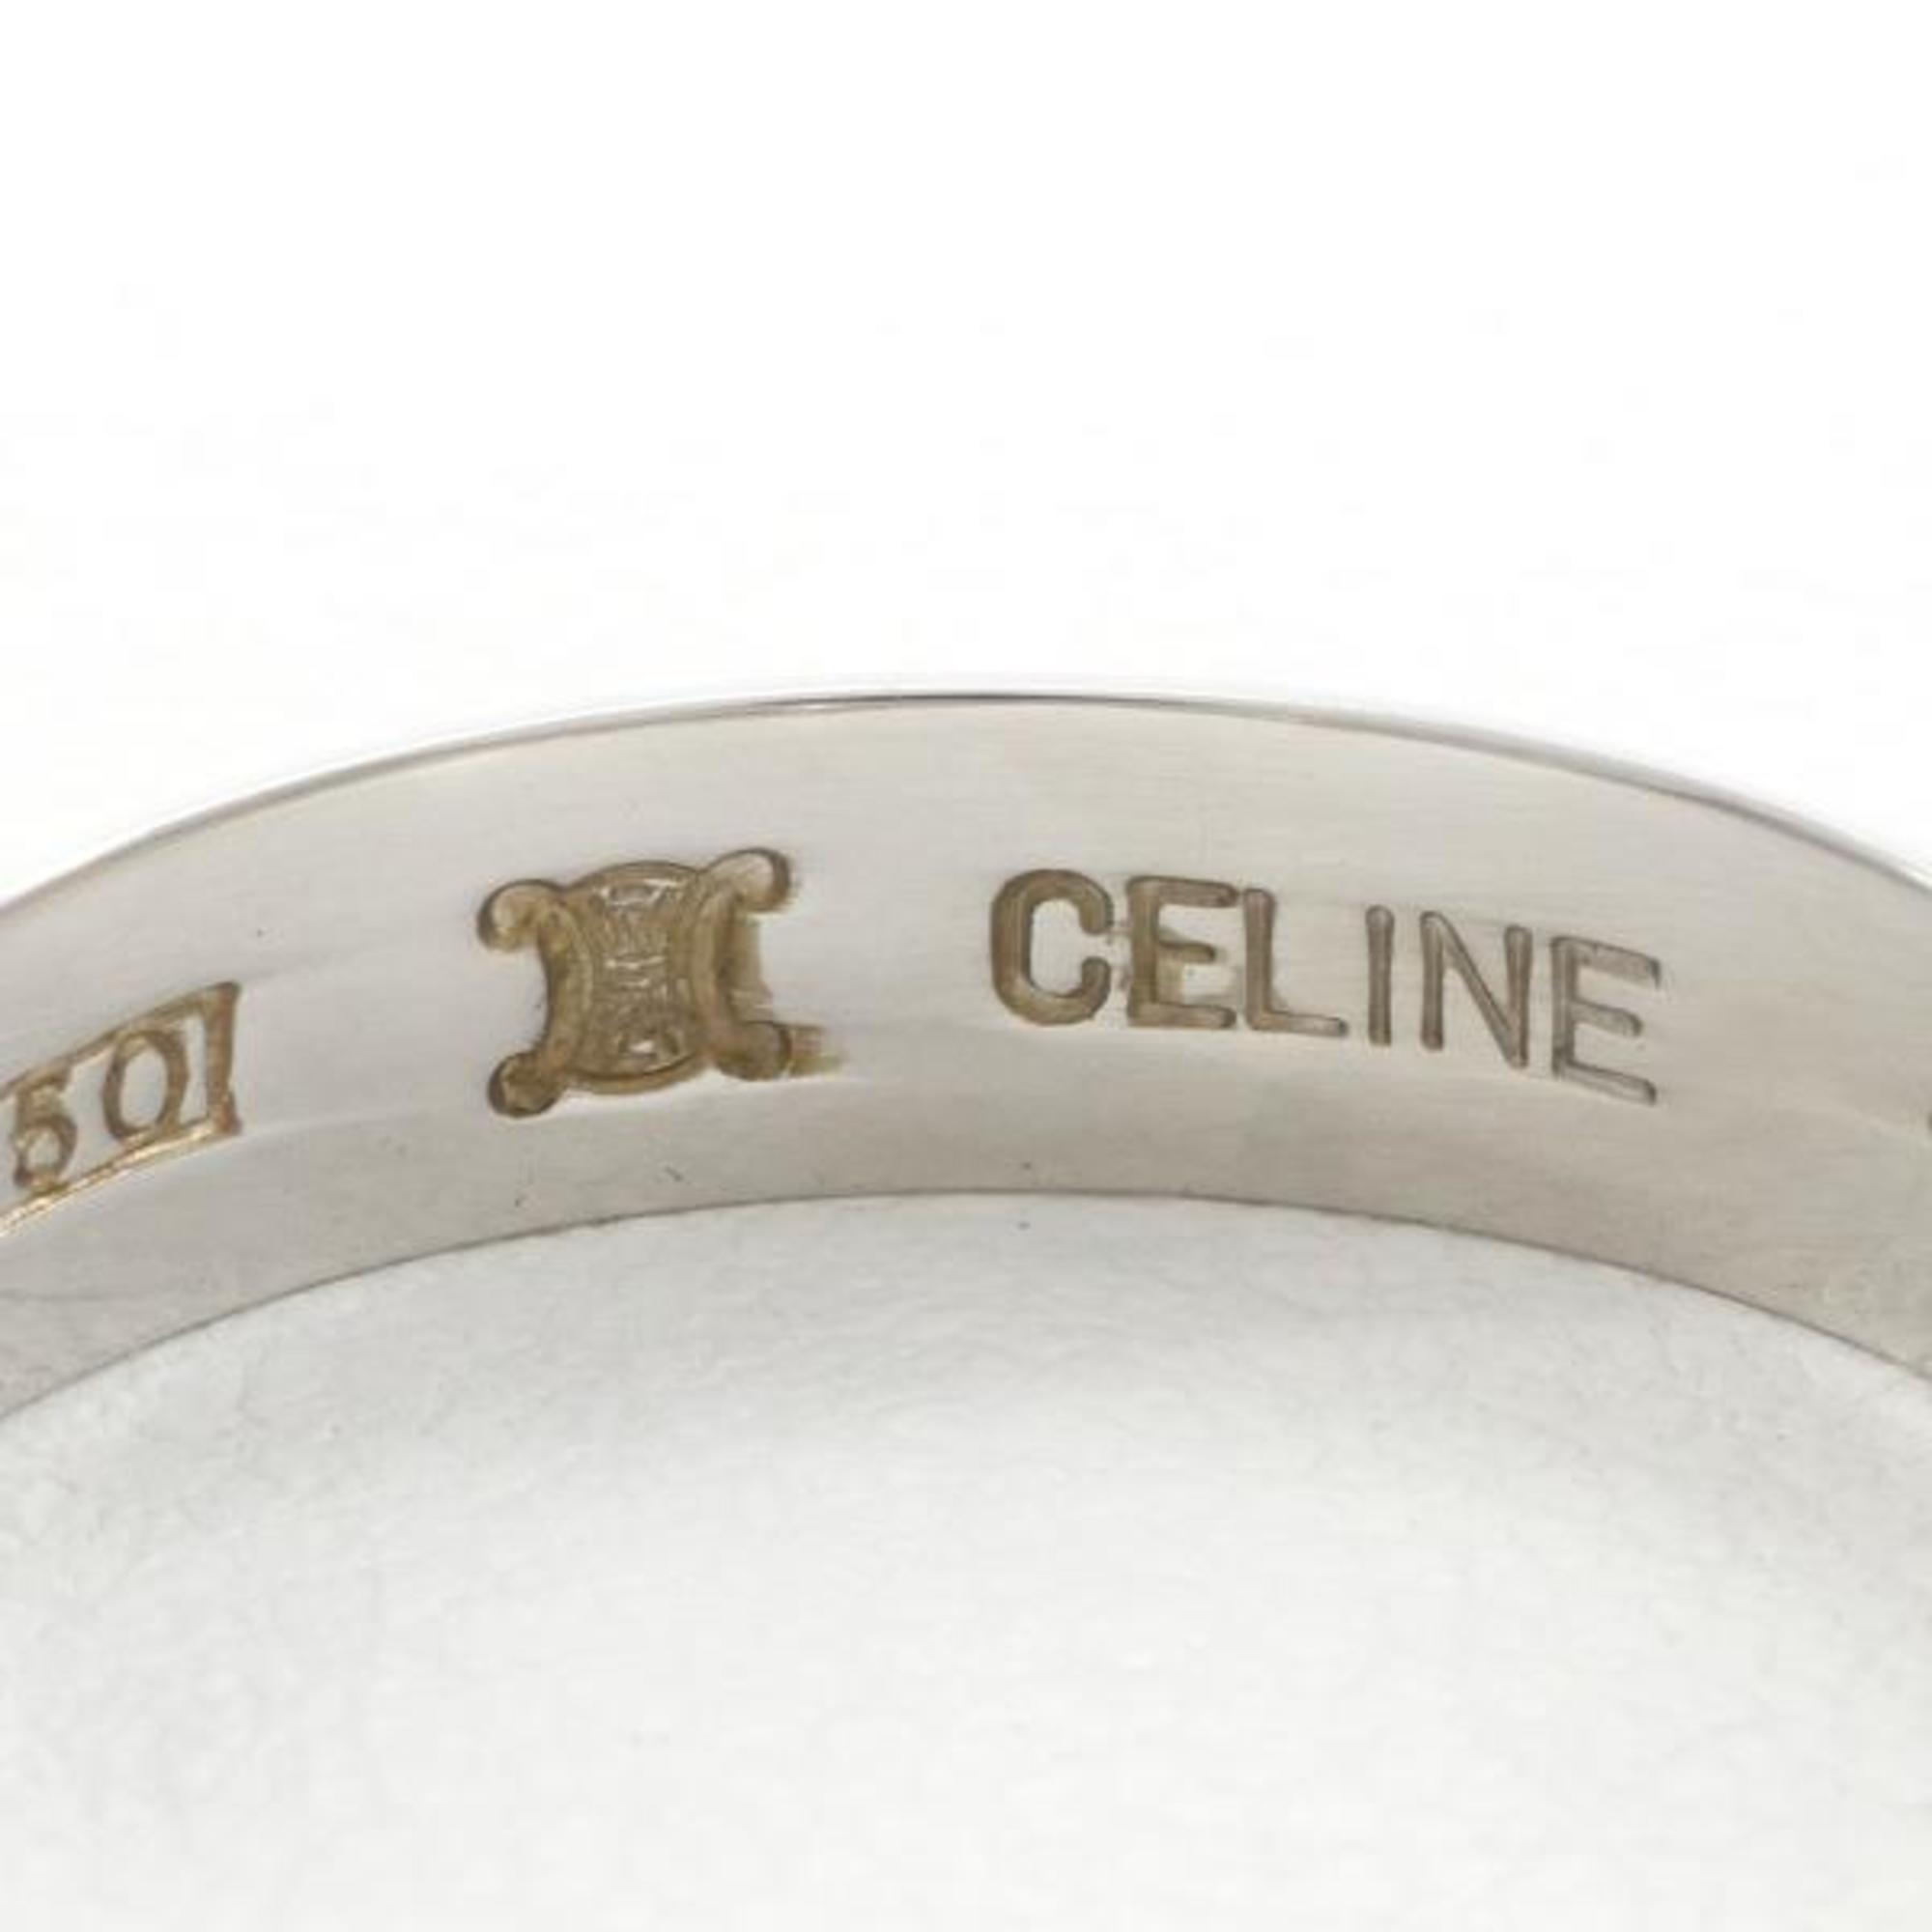 Celine Vintage PT850 K18YG Ring Size 16 Total Weight Approx. 3.3g Jewelry Wrapping Free